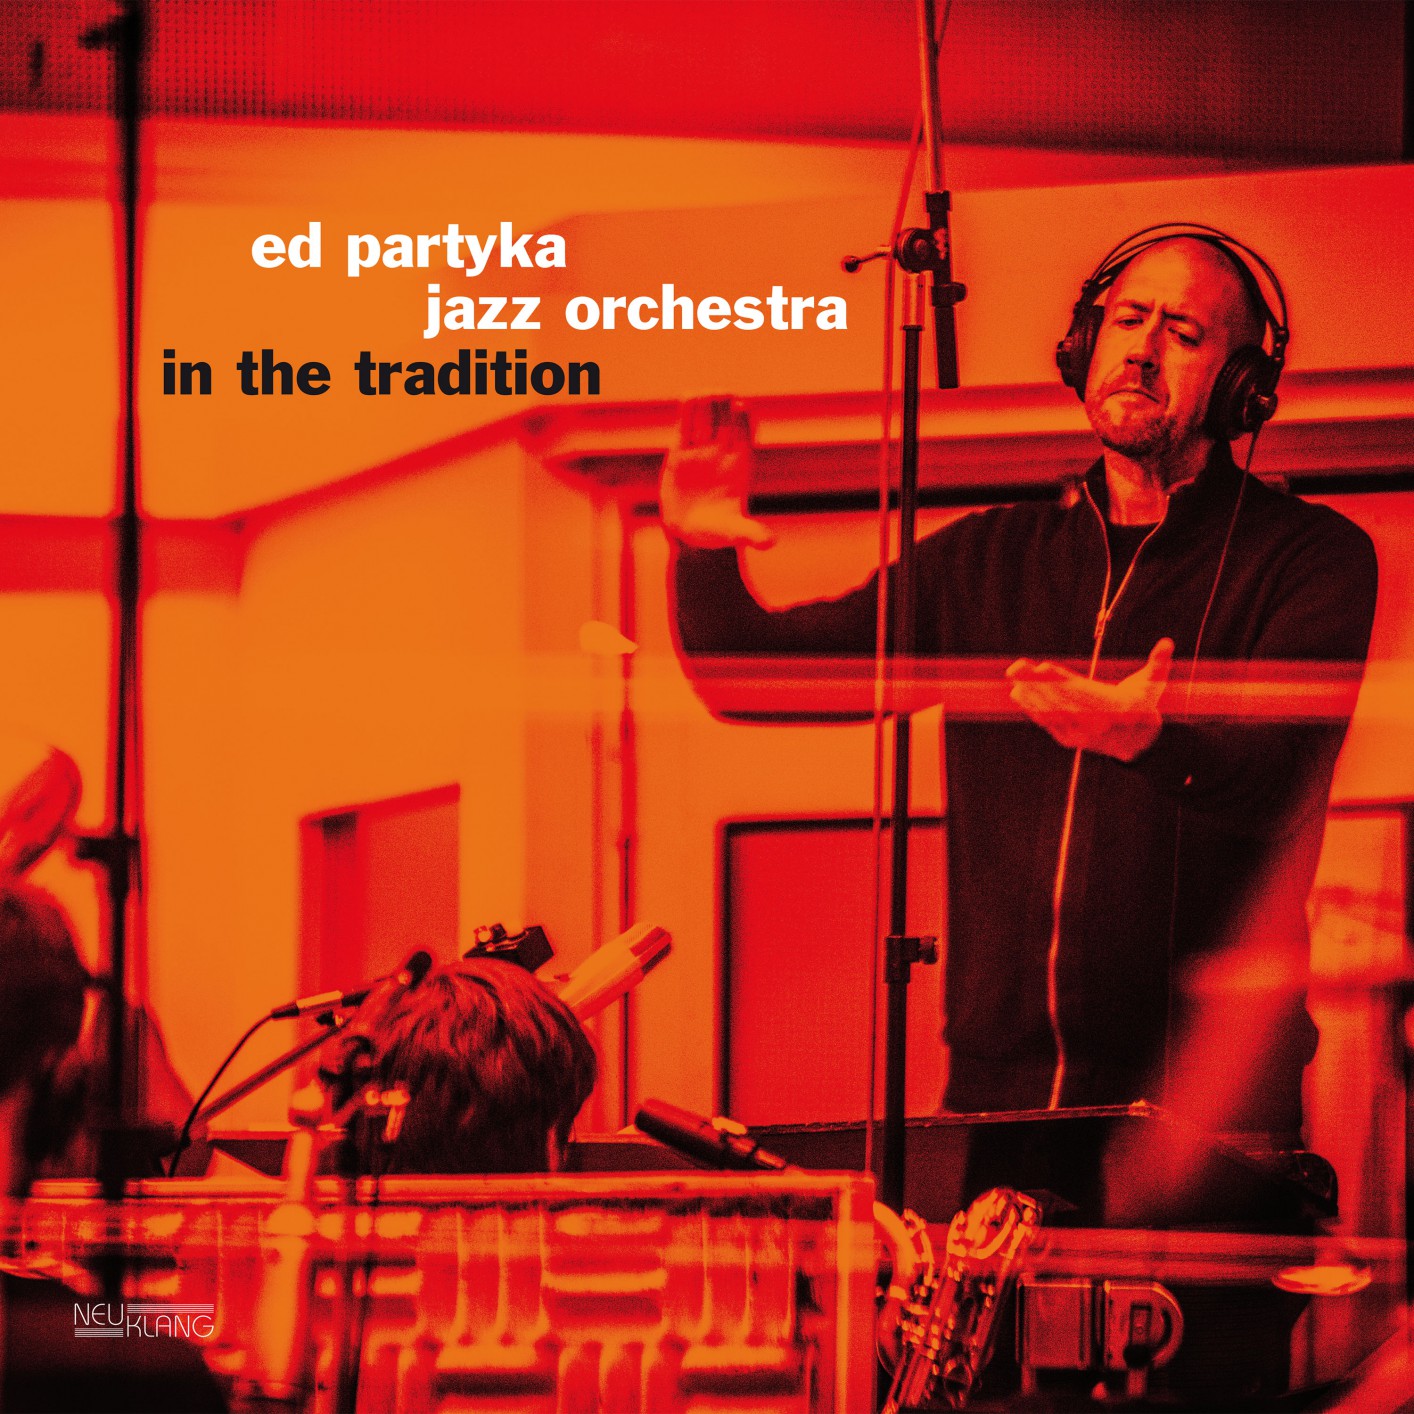 Ed Partyka Jazz Orchestra - In the Tradition (2018) [FLAC 24bit/48kHz]